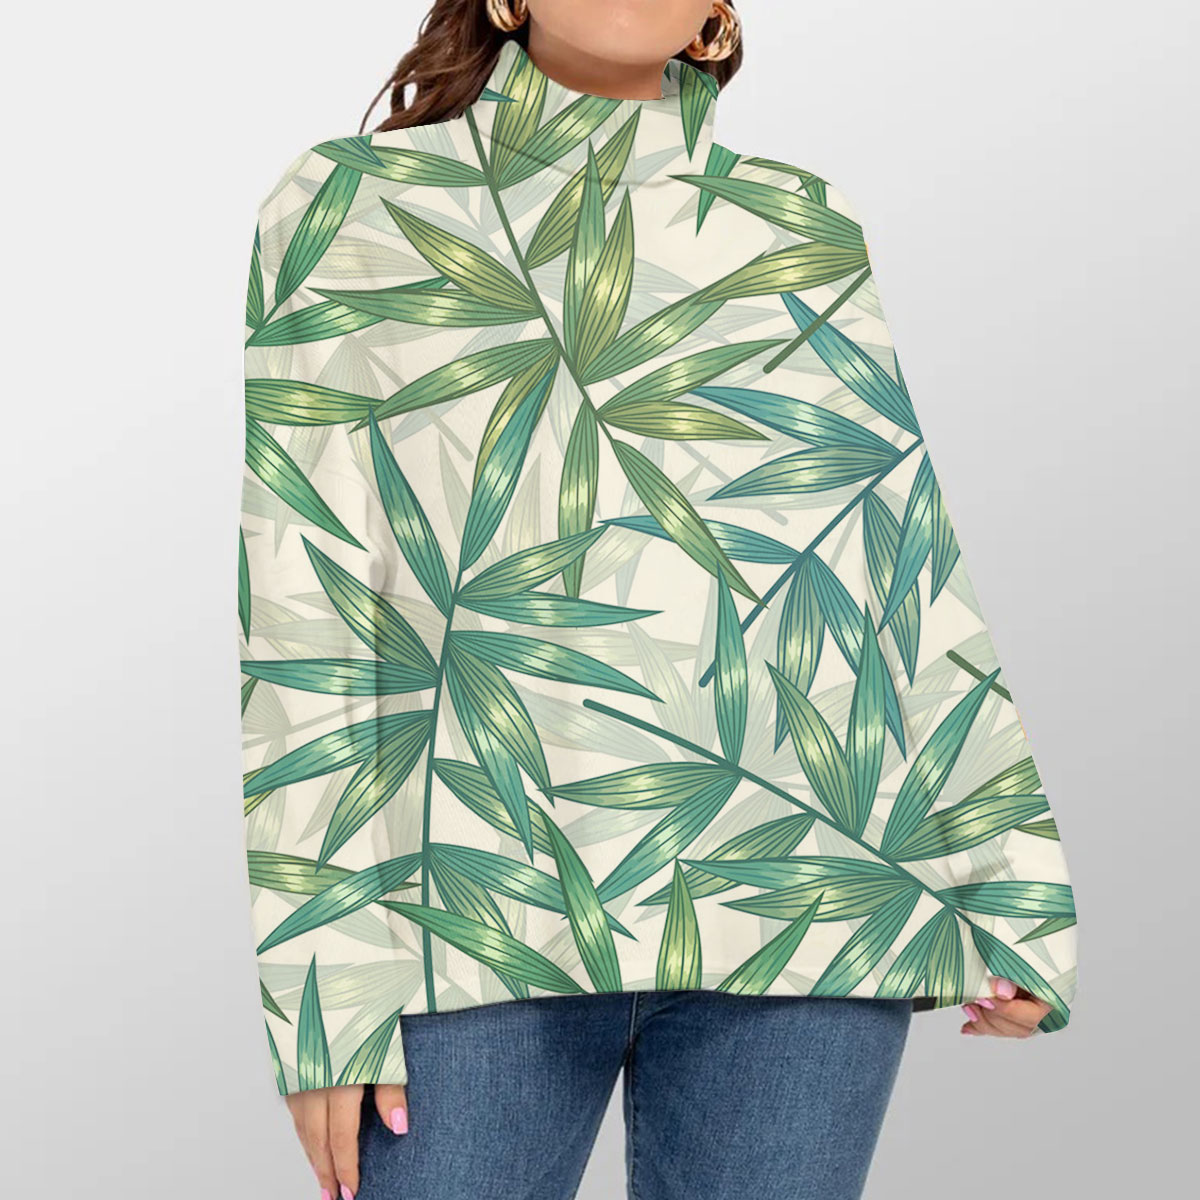 Green Gold Bamboo Leaves Turtleneck Sweater